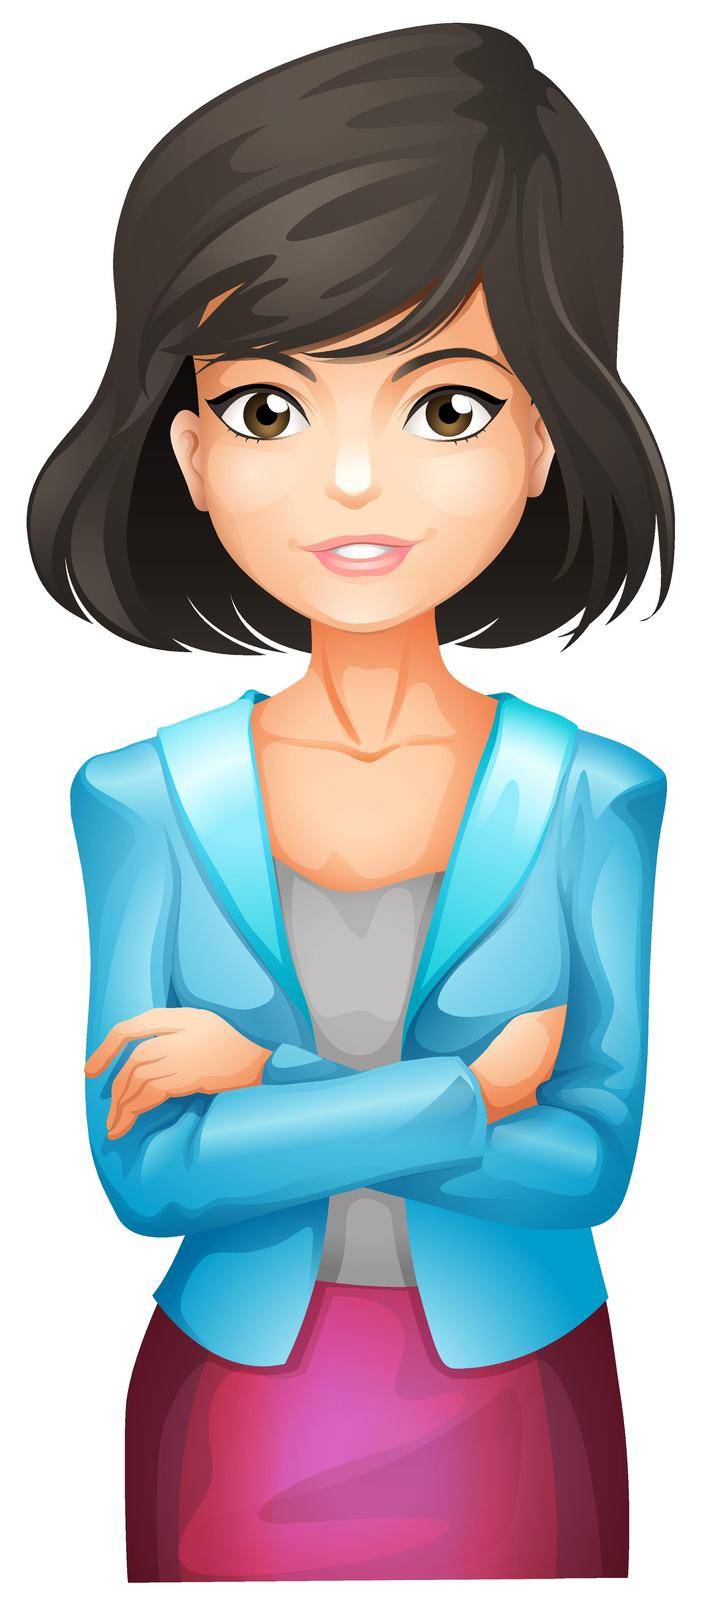 Illustration of a businesswoman wearing a blue blazer on a white background